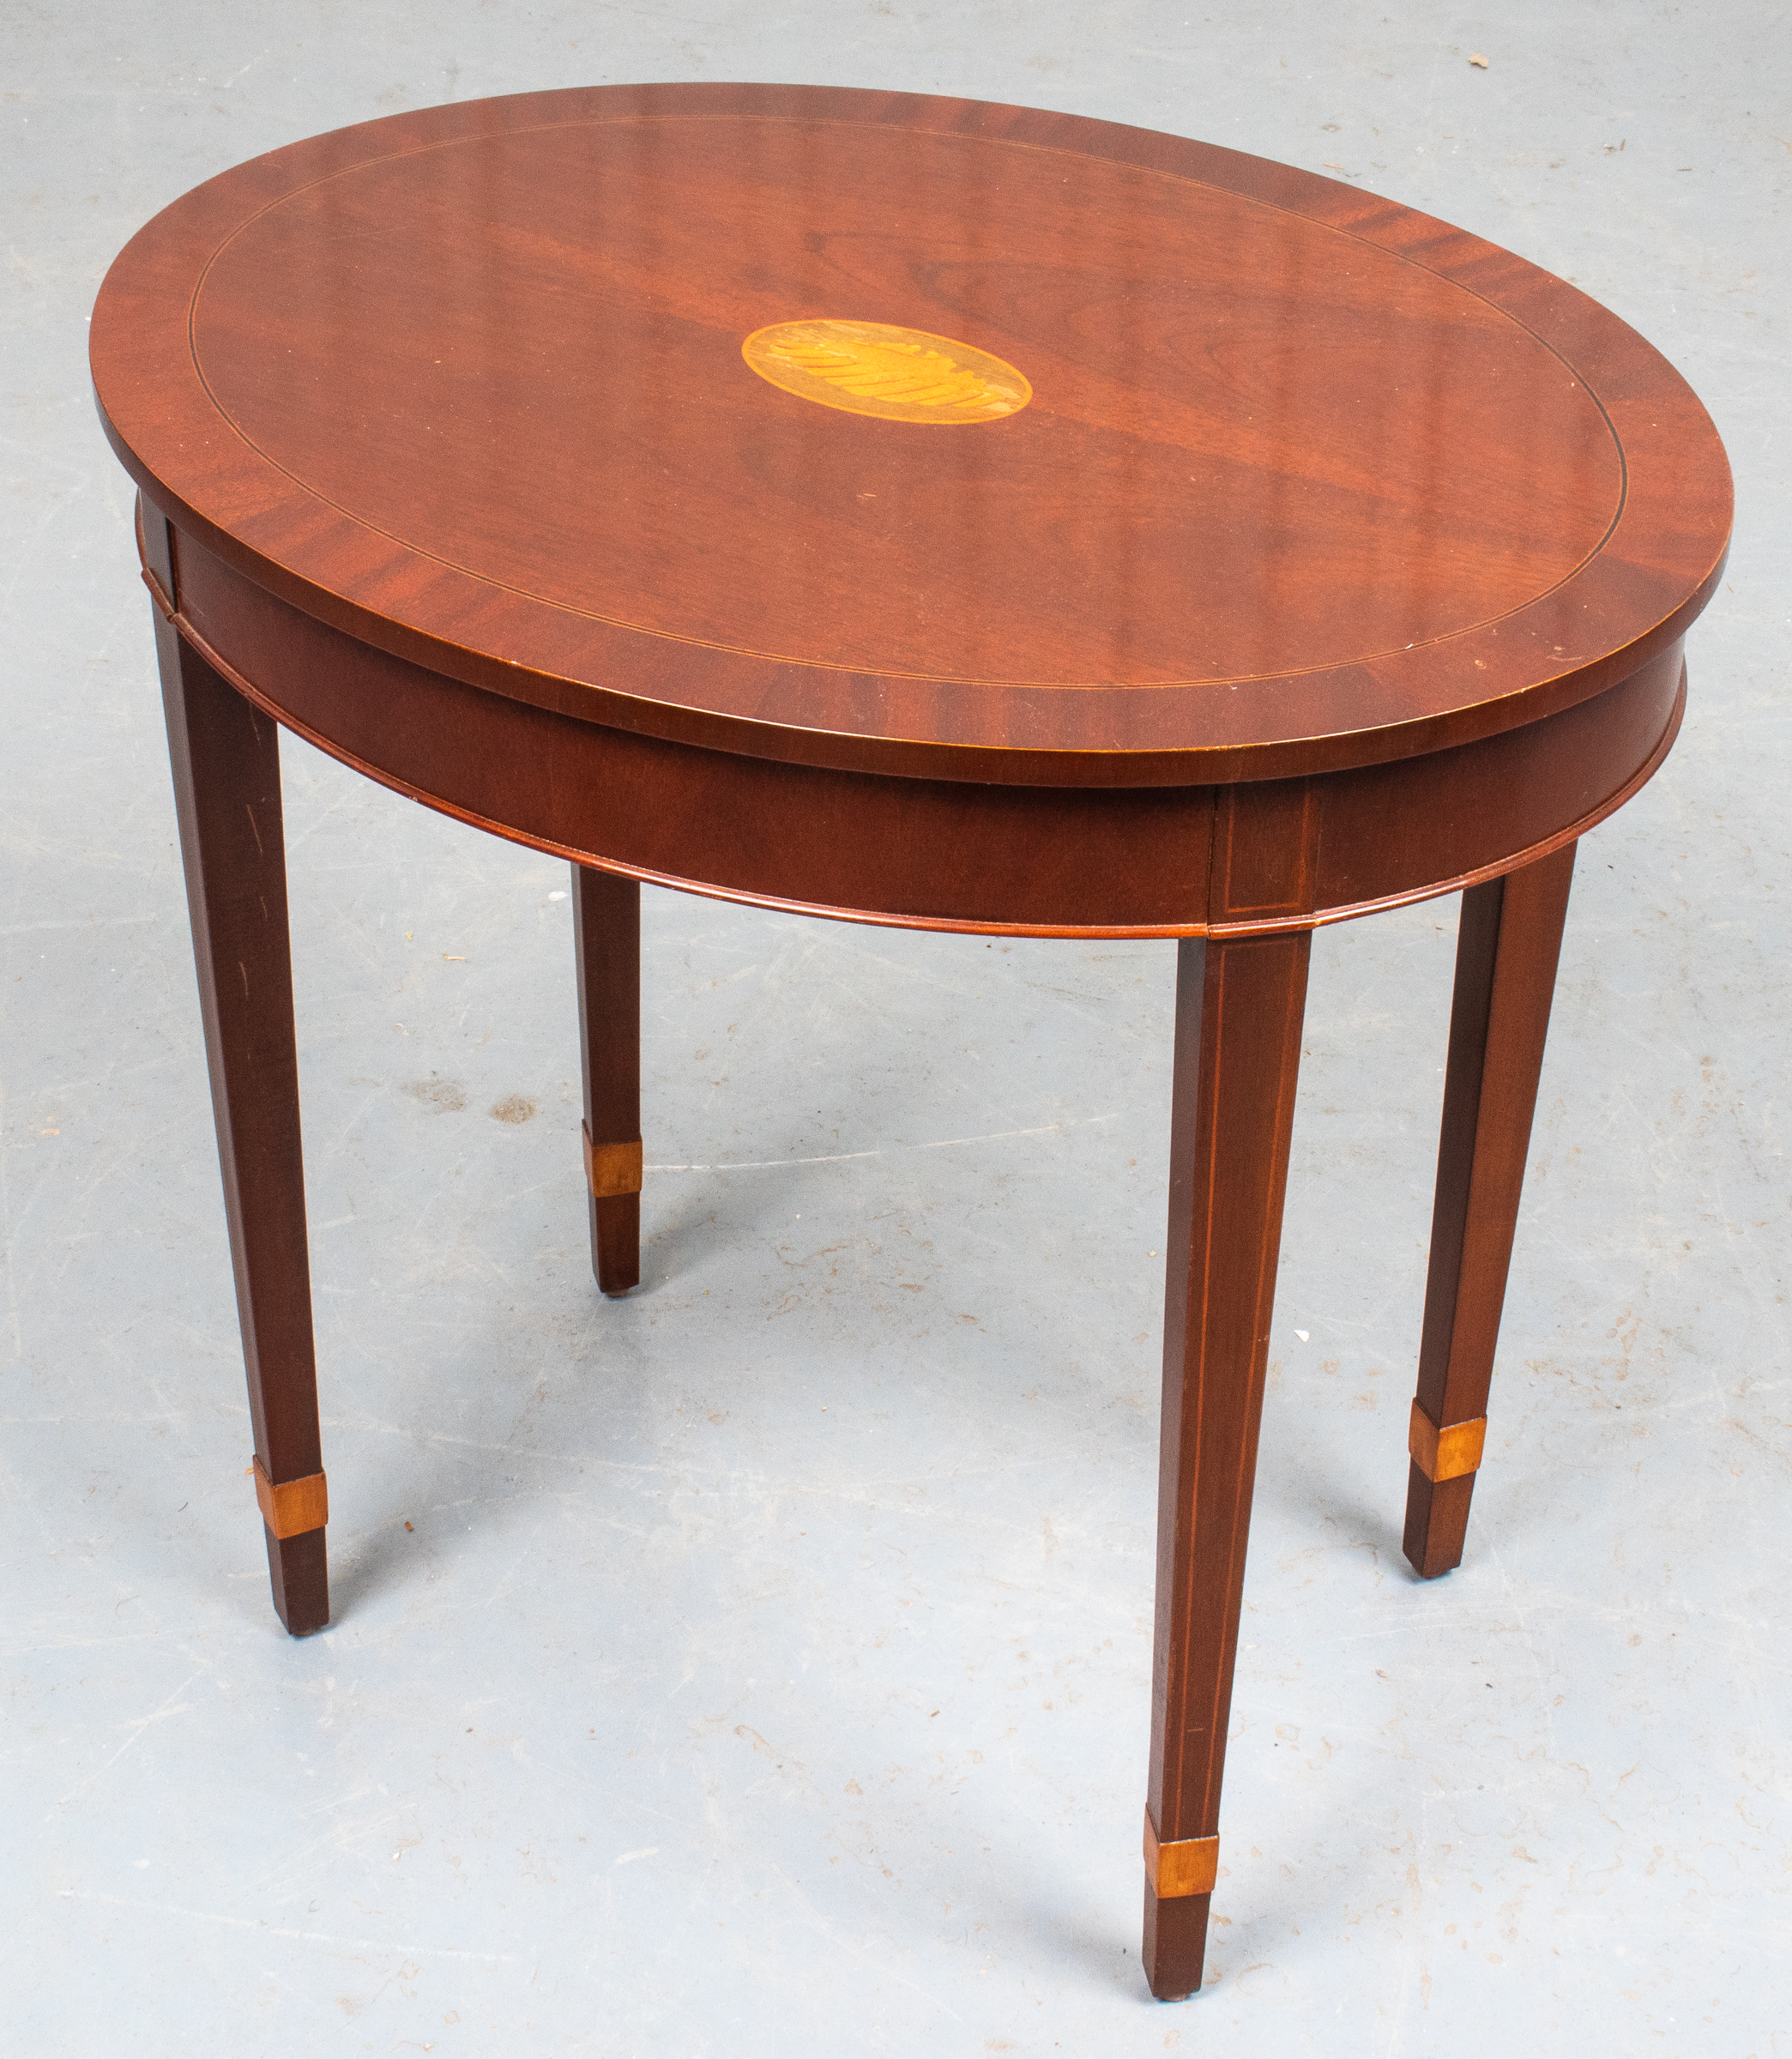 GEORGE III STYLE INLAID SIDE TABLE 3c4d3b